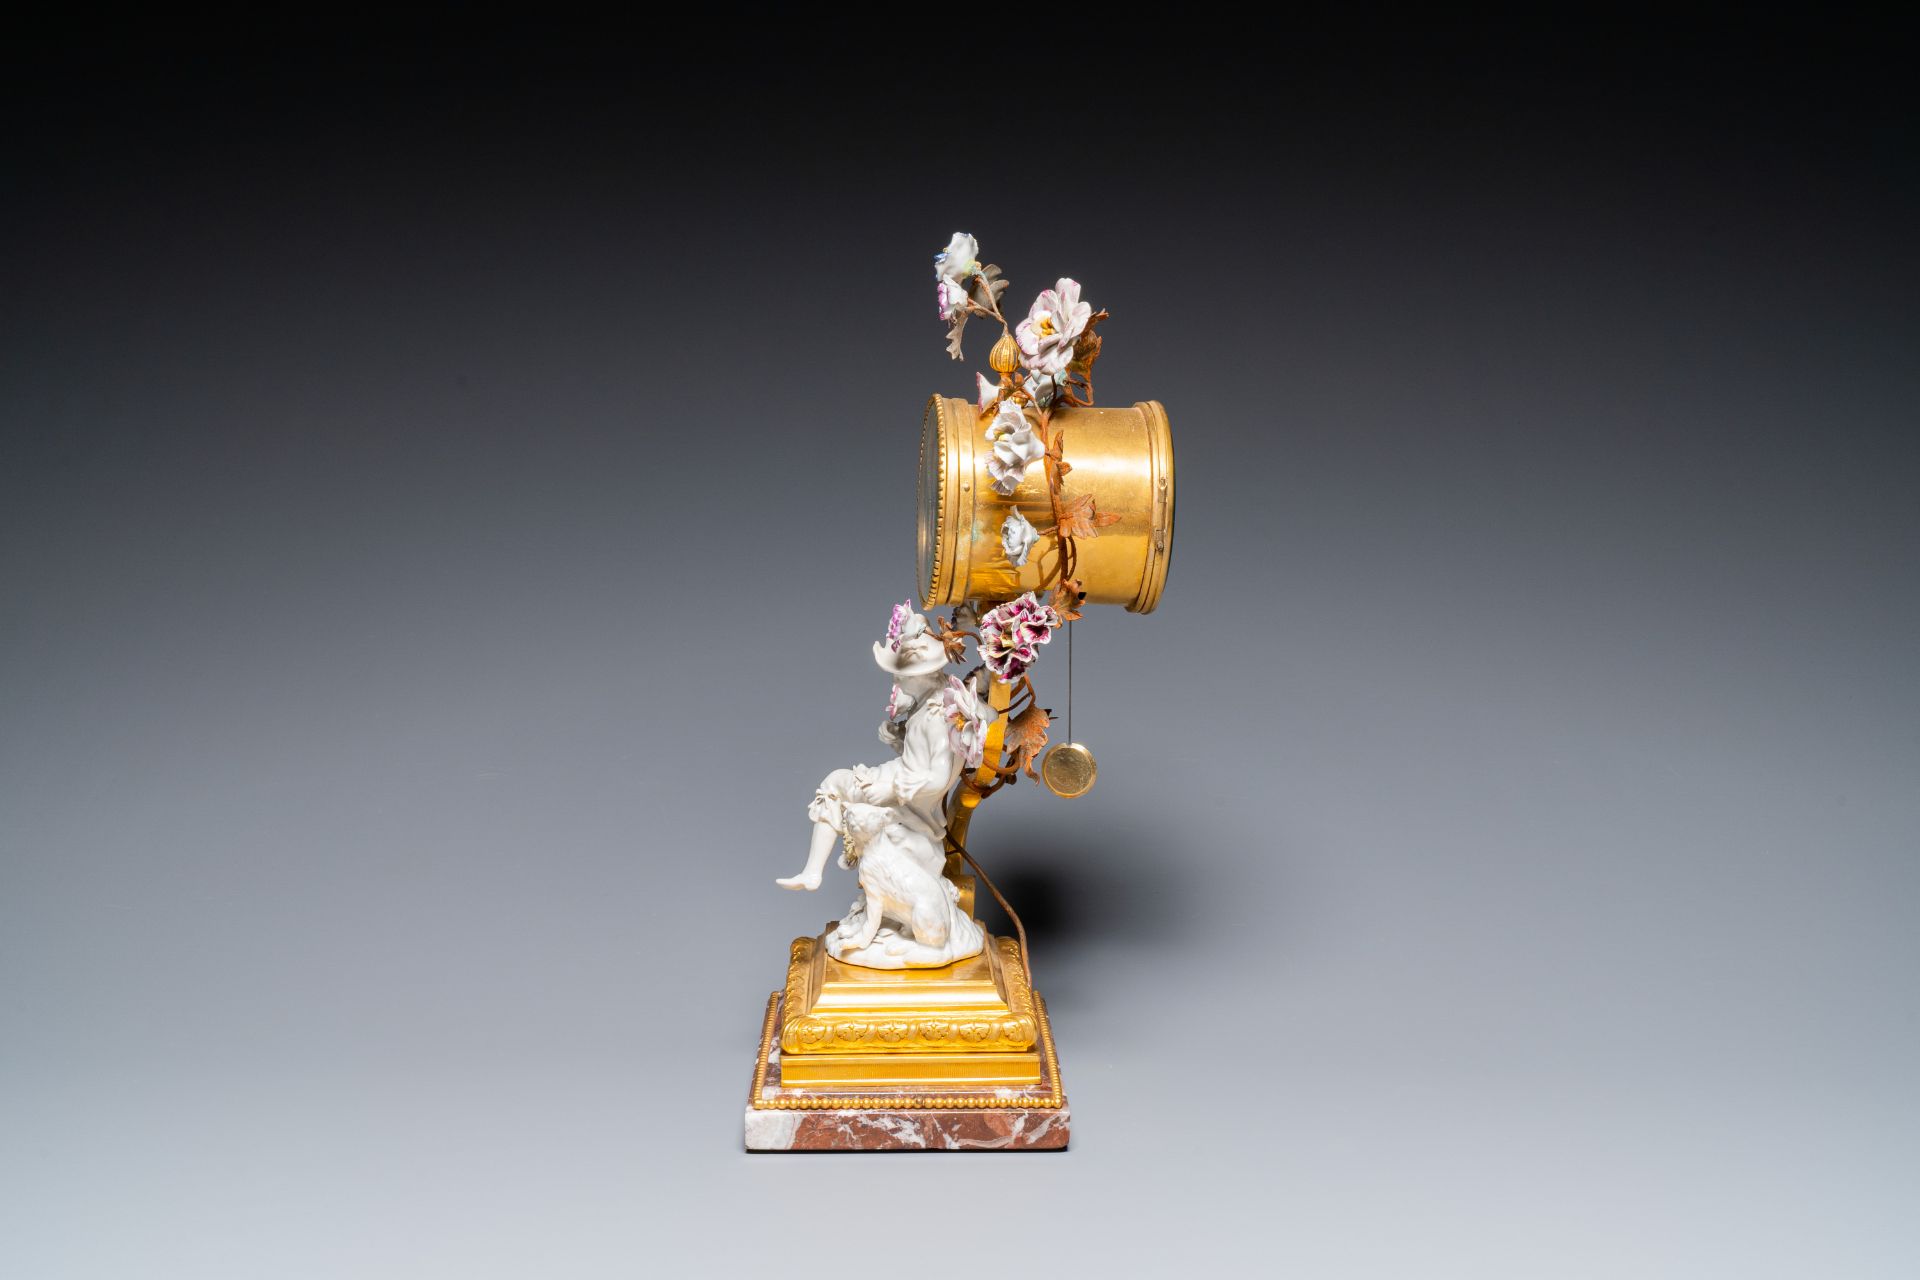 A French ormolu-mounted porcelain mantel clock, 18/19th C. - Image 12 of 28